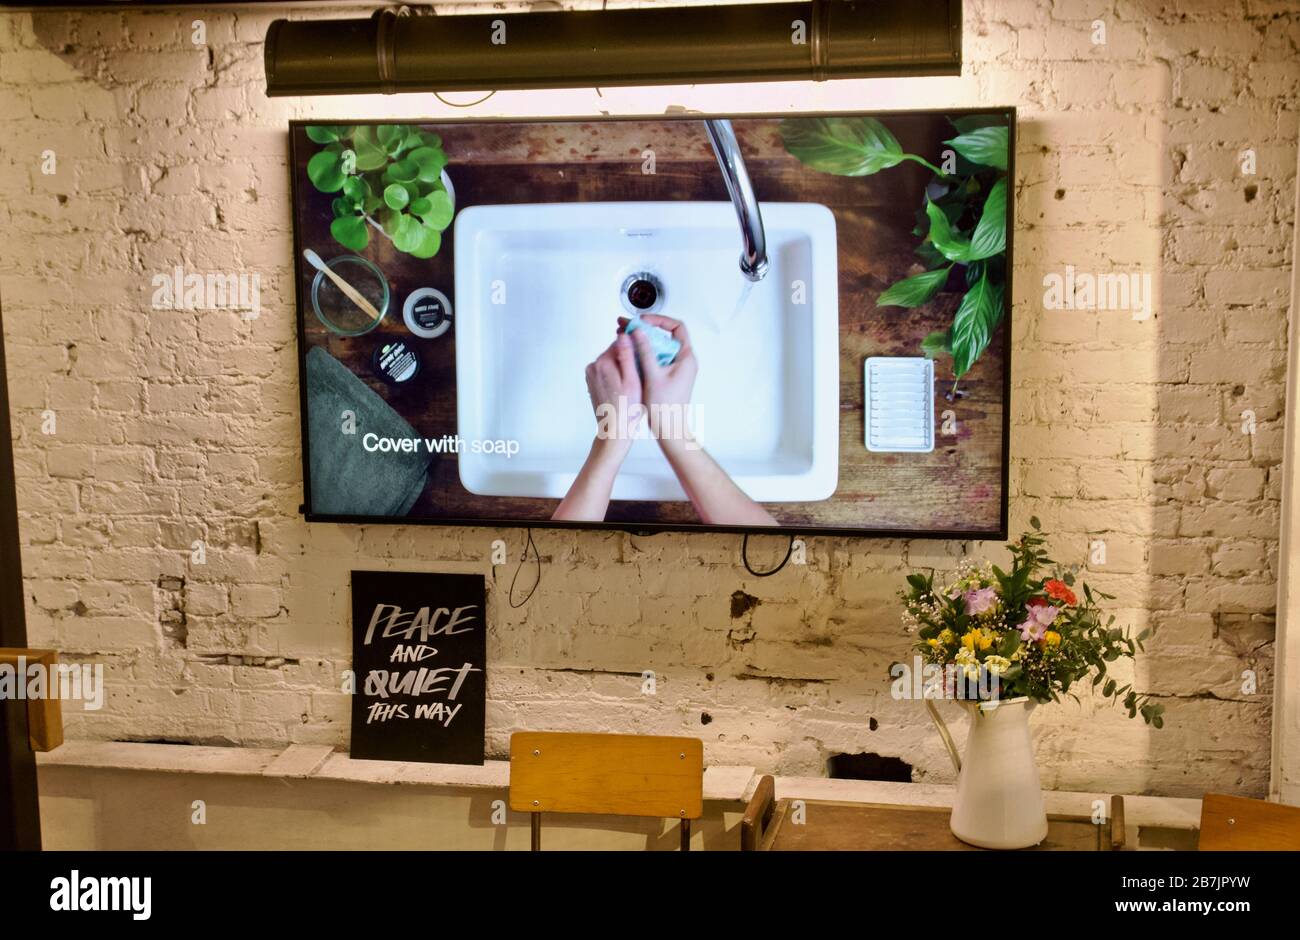 A hand washing guide video inside a UK lush store, promoting public health during Coronavirus Stock Photo